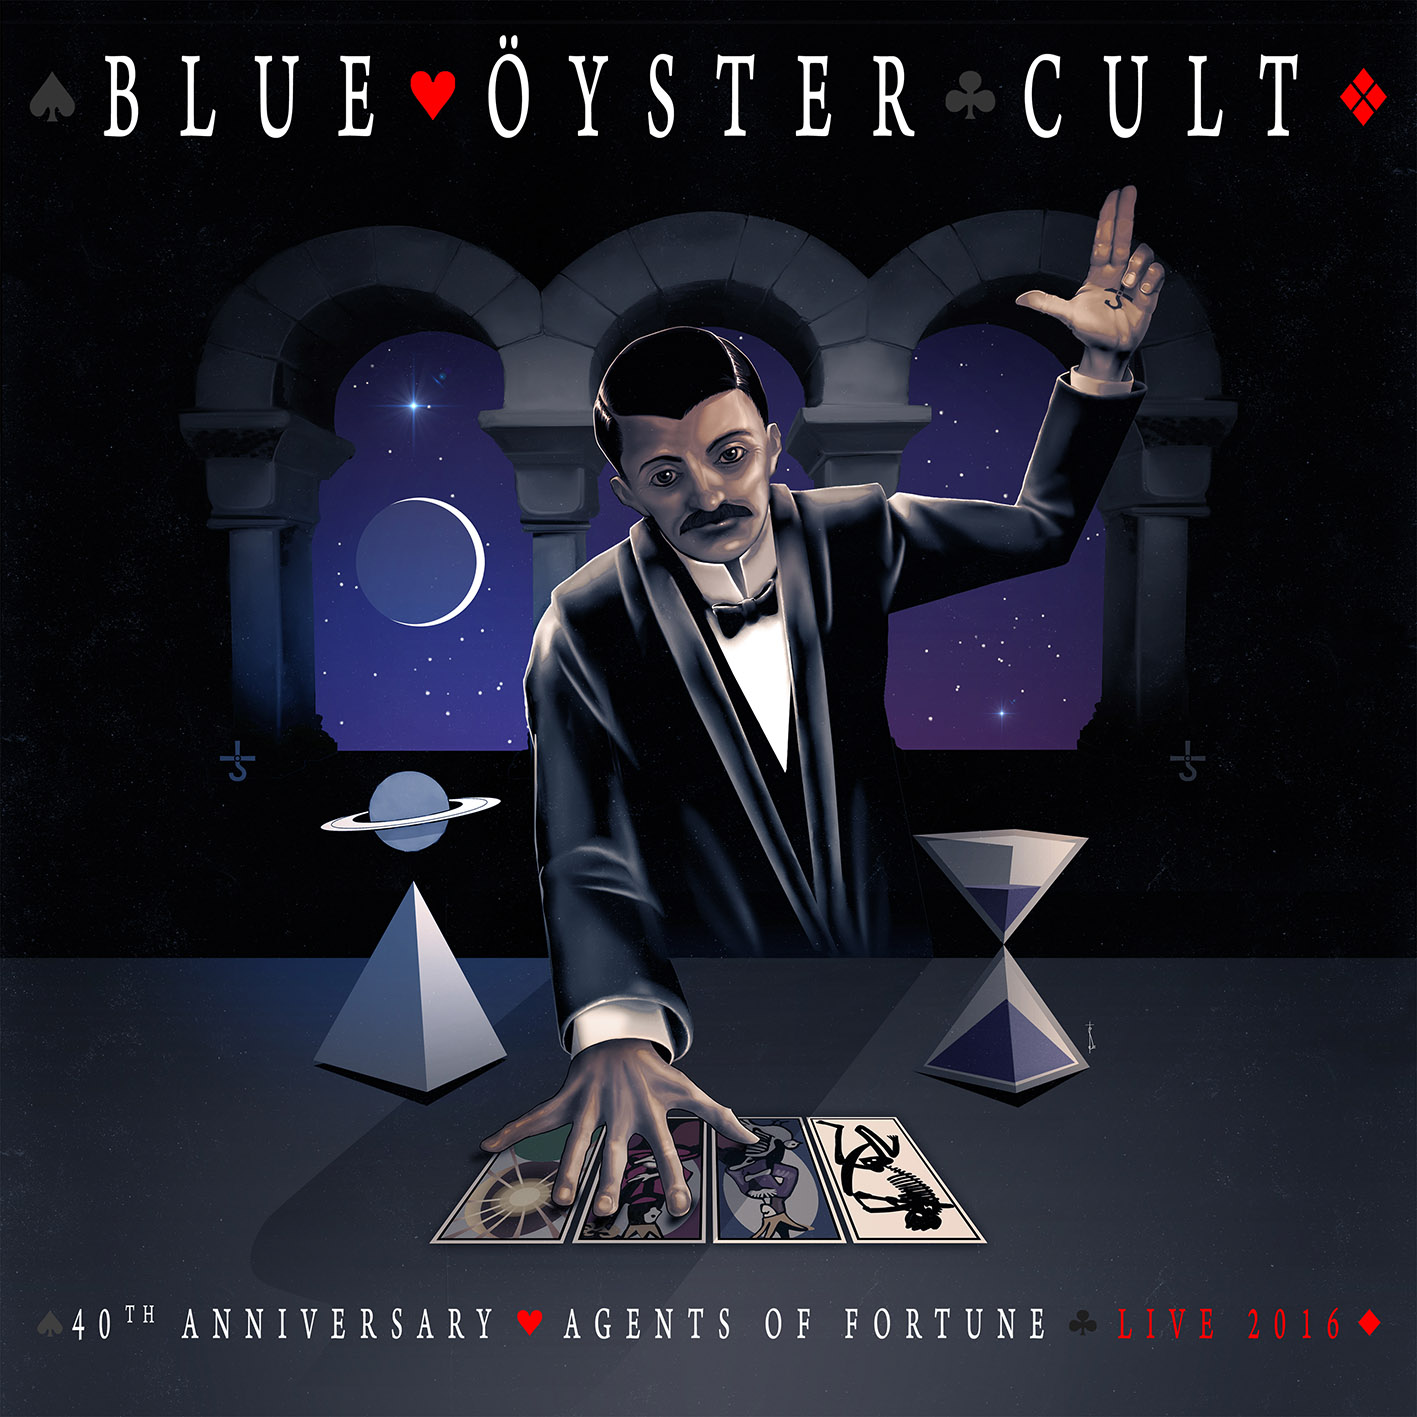 BLUE OYSTER CULT - “40Th Anniversary - Agents Of Fortune - Live 2016”